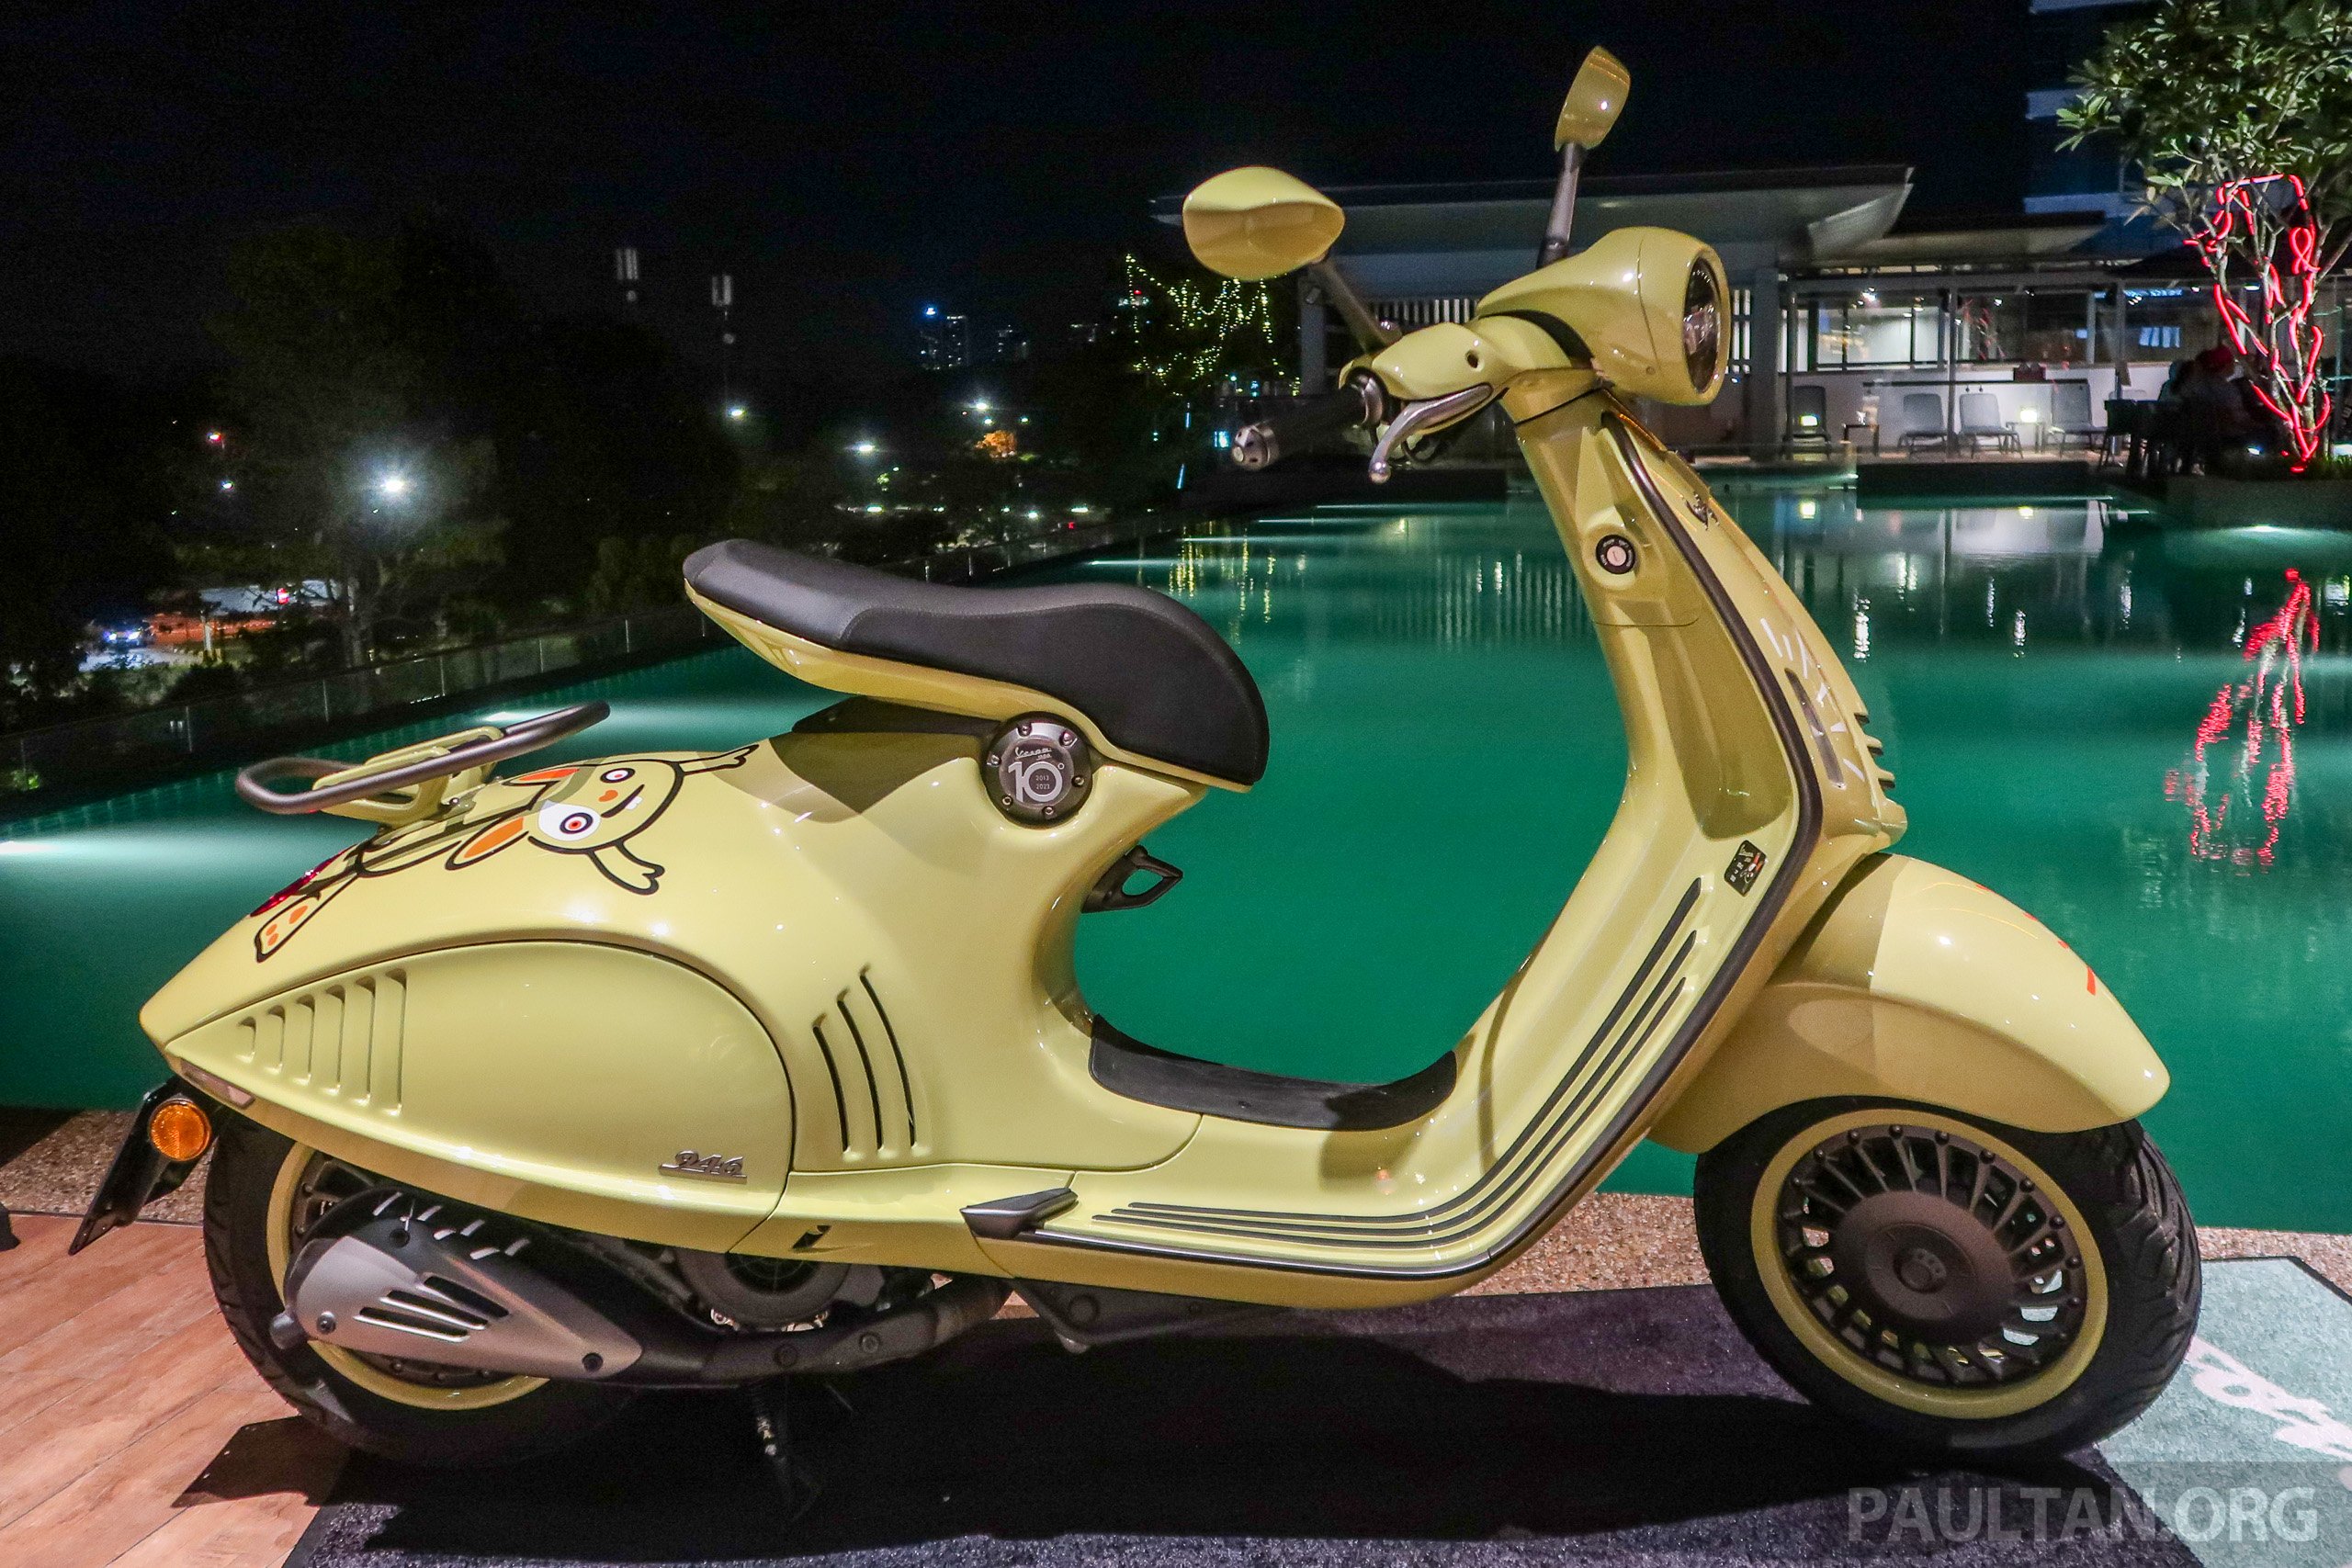 Vespa 946 Louis Vuitton, the only one in the world 1 of 1